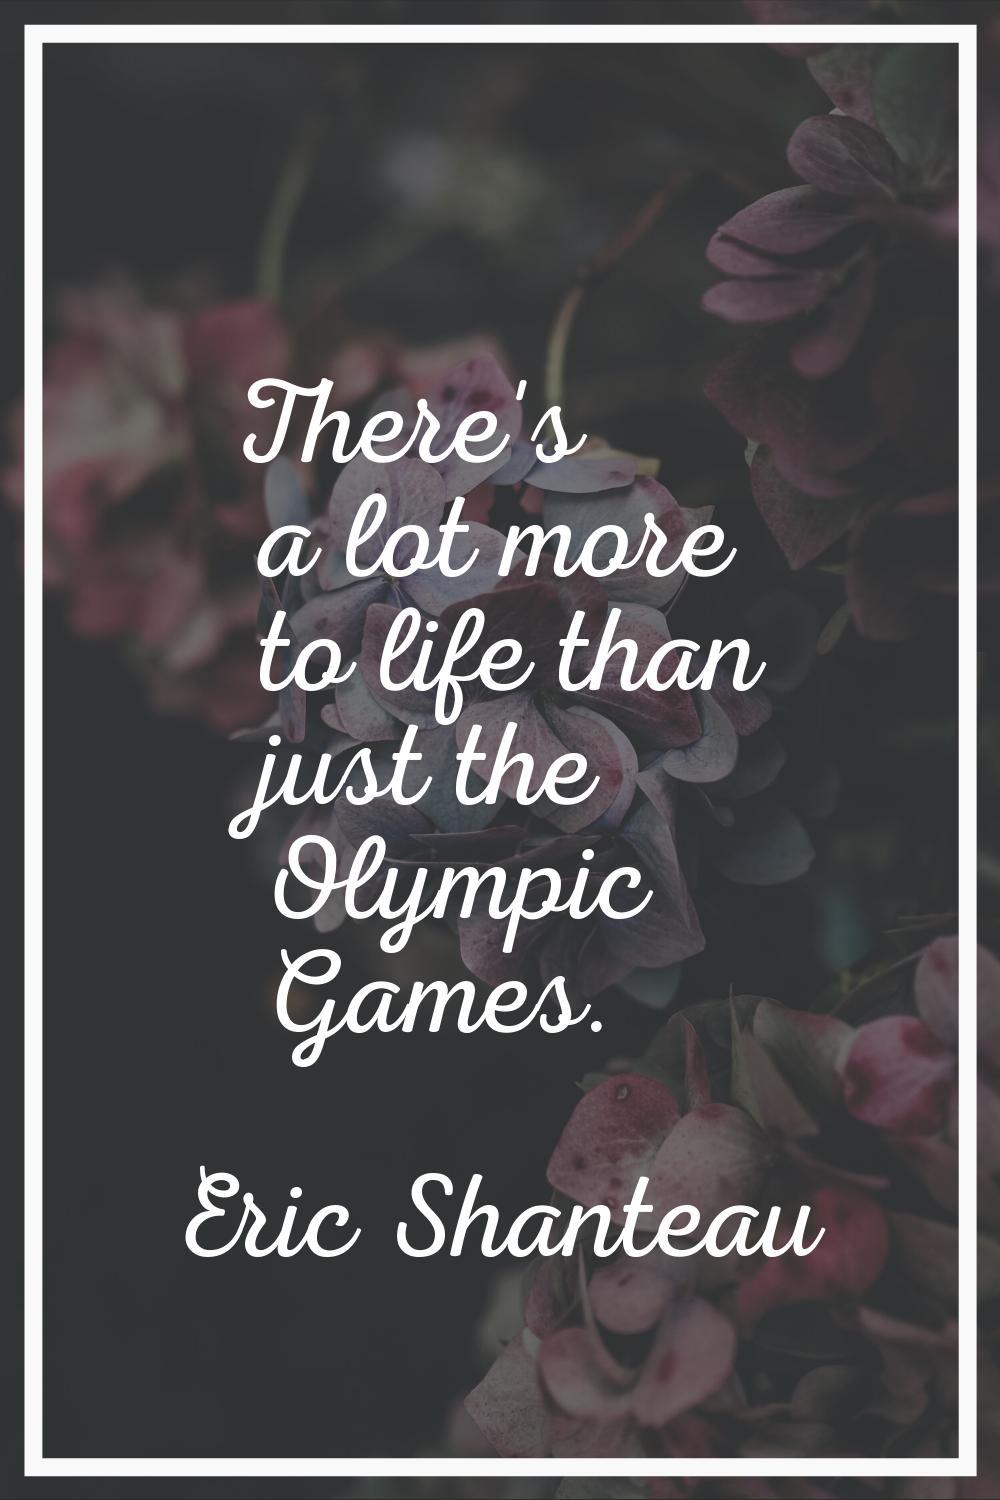 There's a lot more to life than just the Olympic Games.